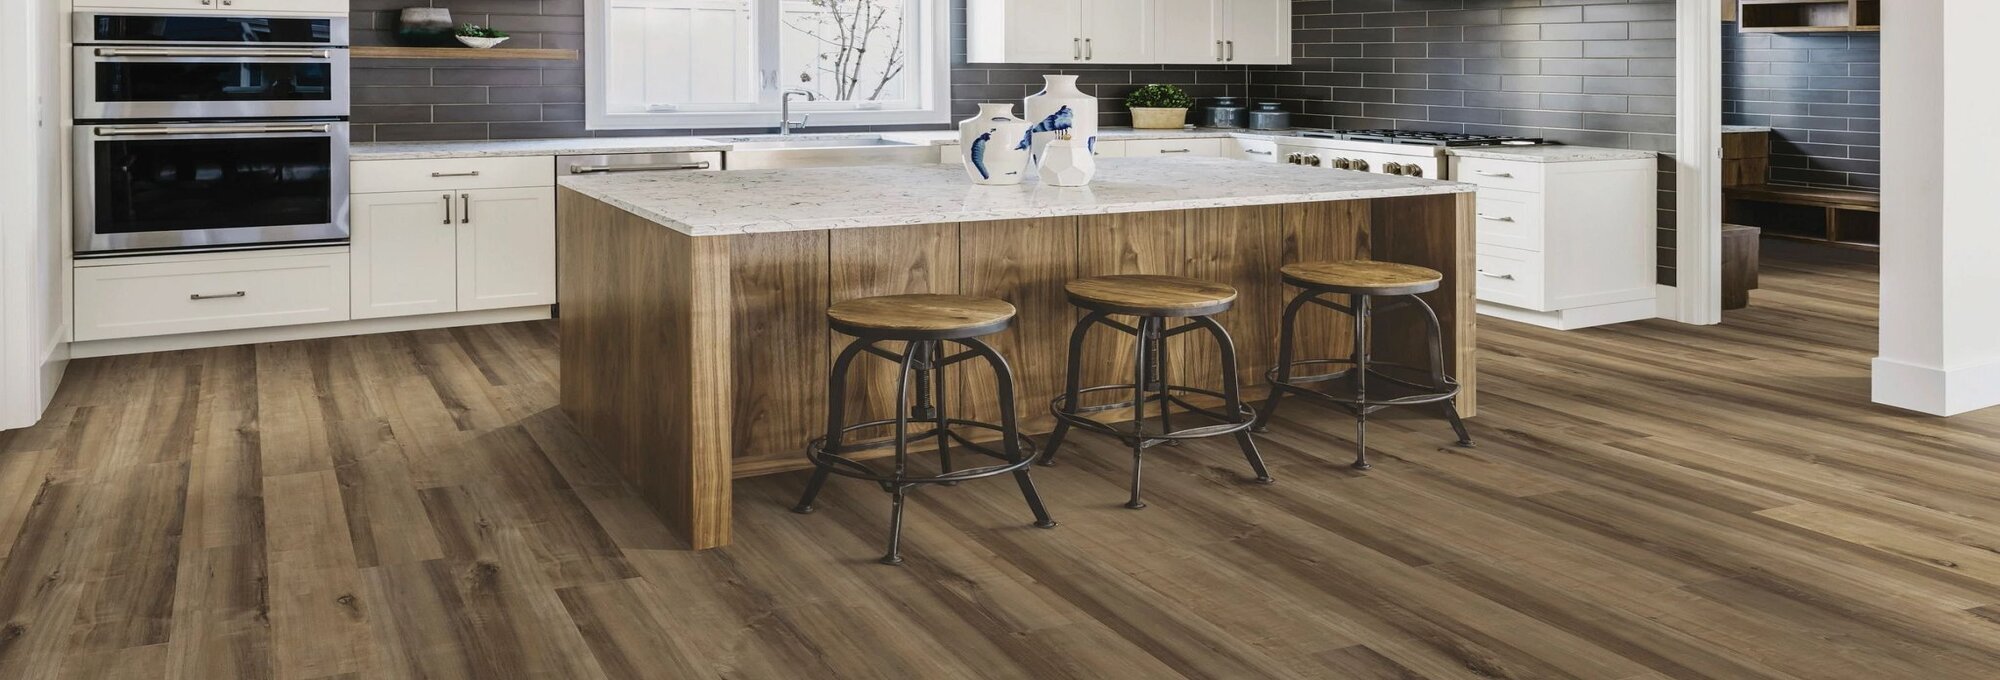 Modern kitchen with wood-look luxury vinyl flooring from Success Floor Covering LLC in Oakland, MD